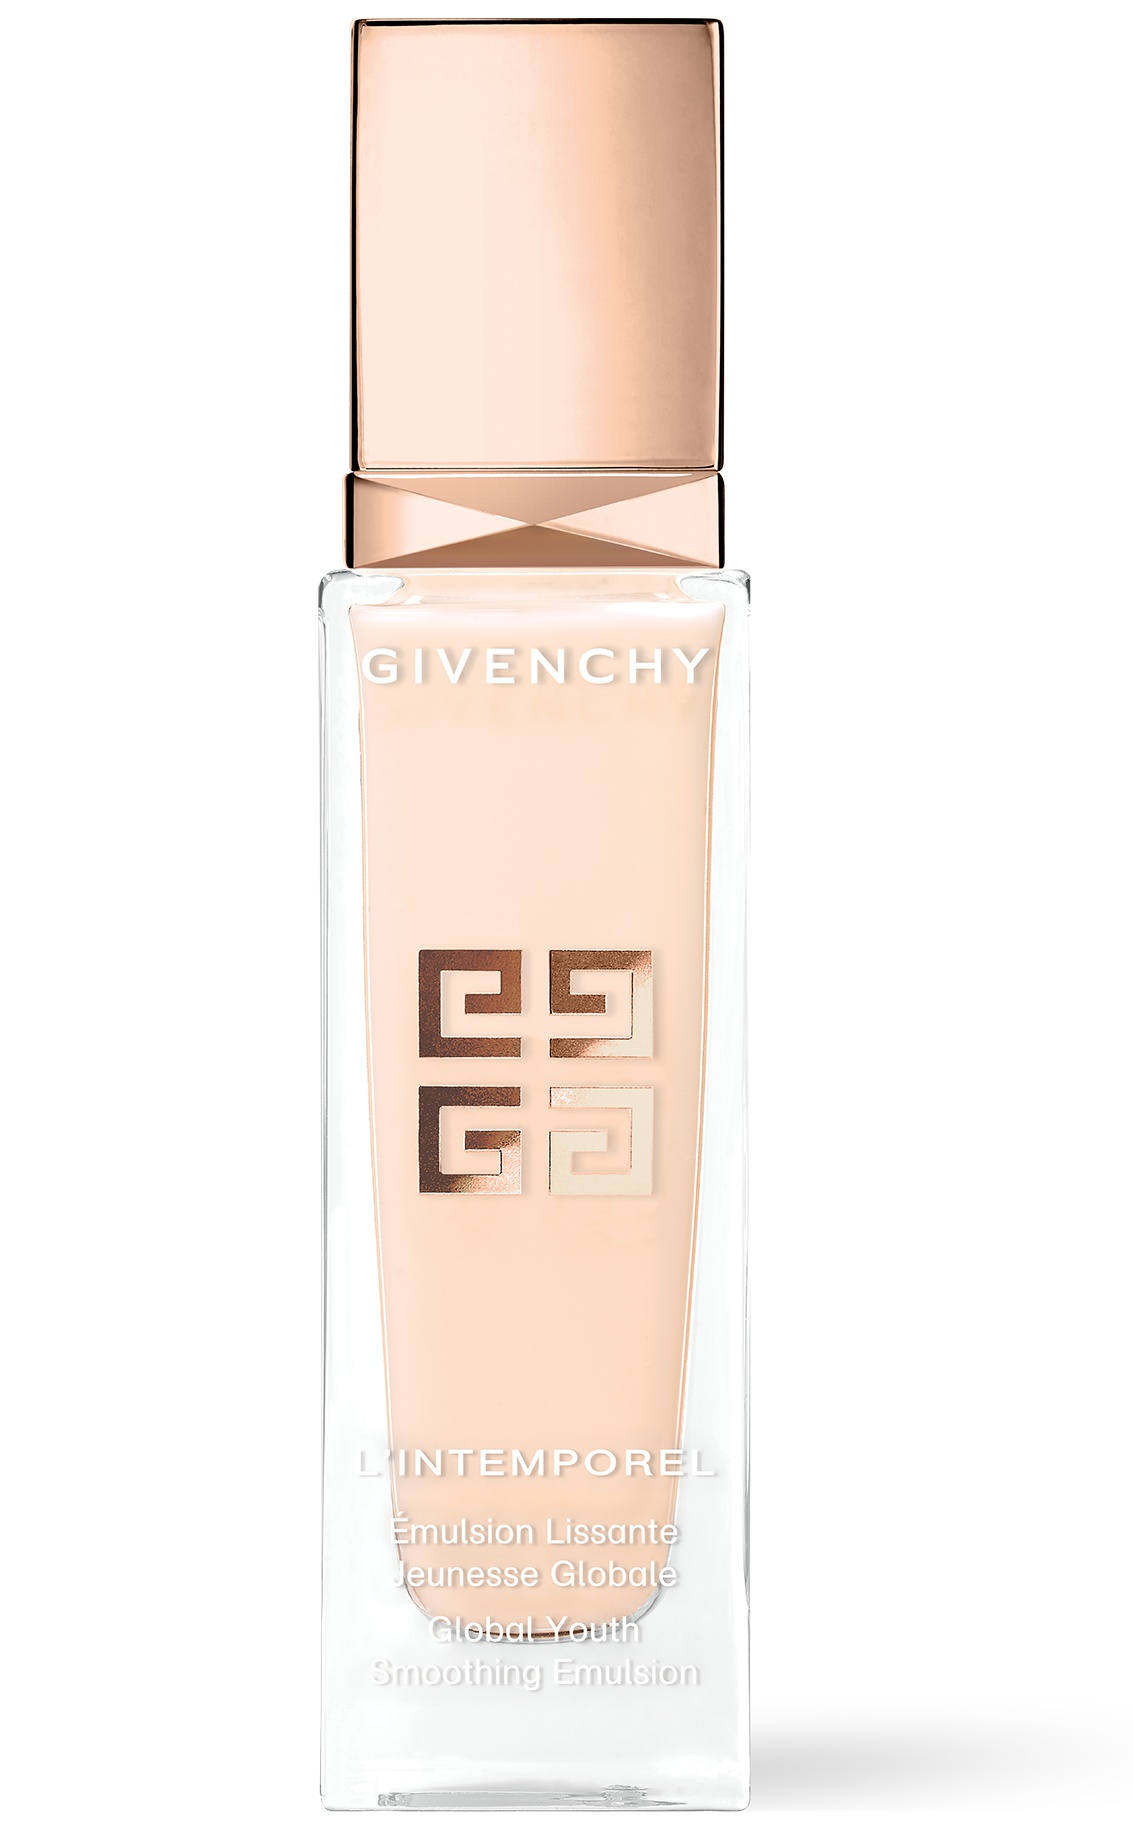 Givenchy L'Intemporel Global Youth Smoothing Emulsion